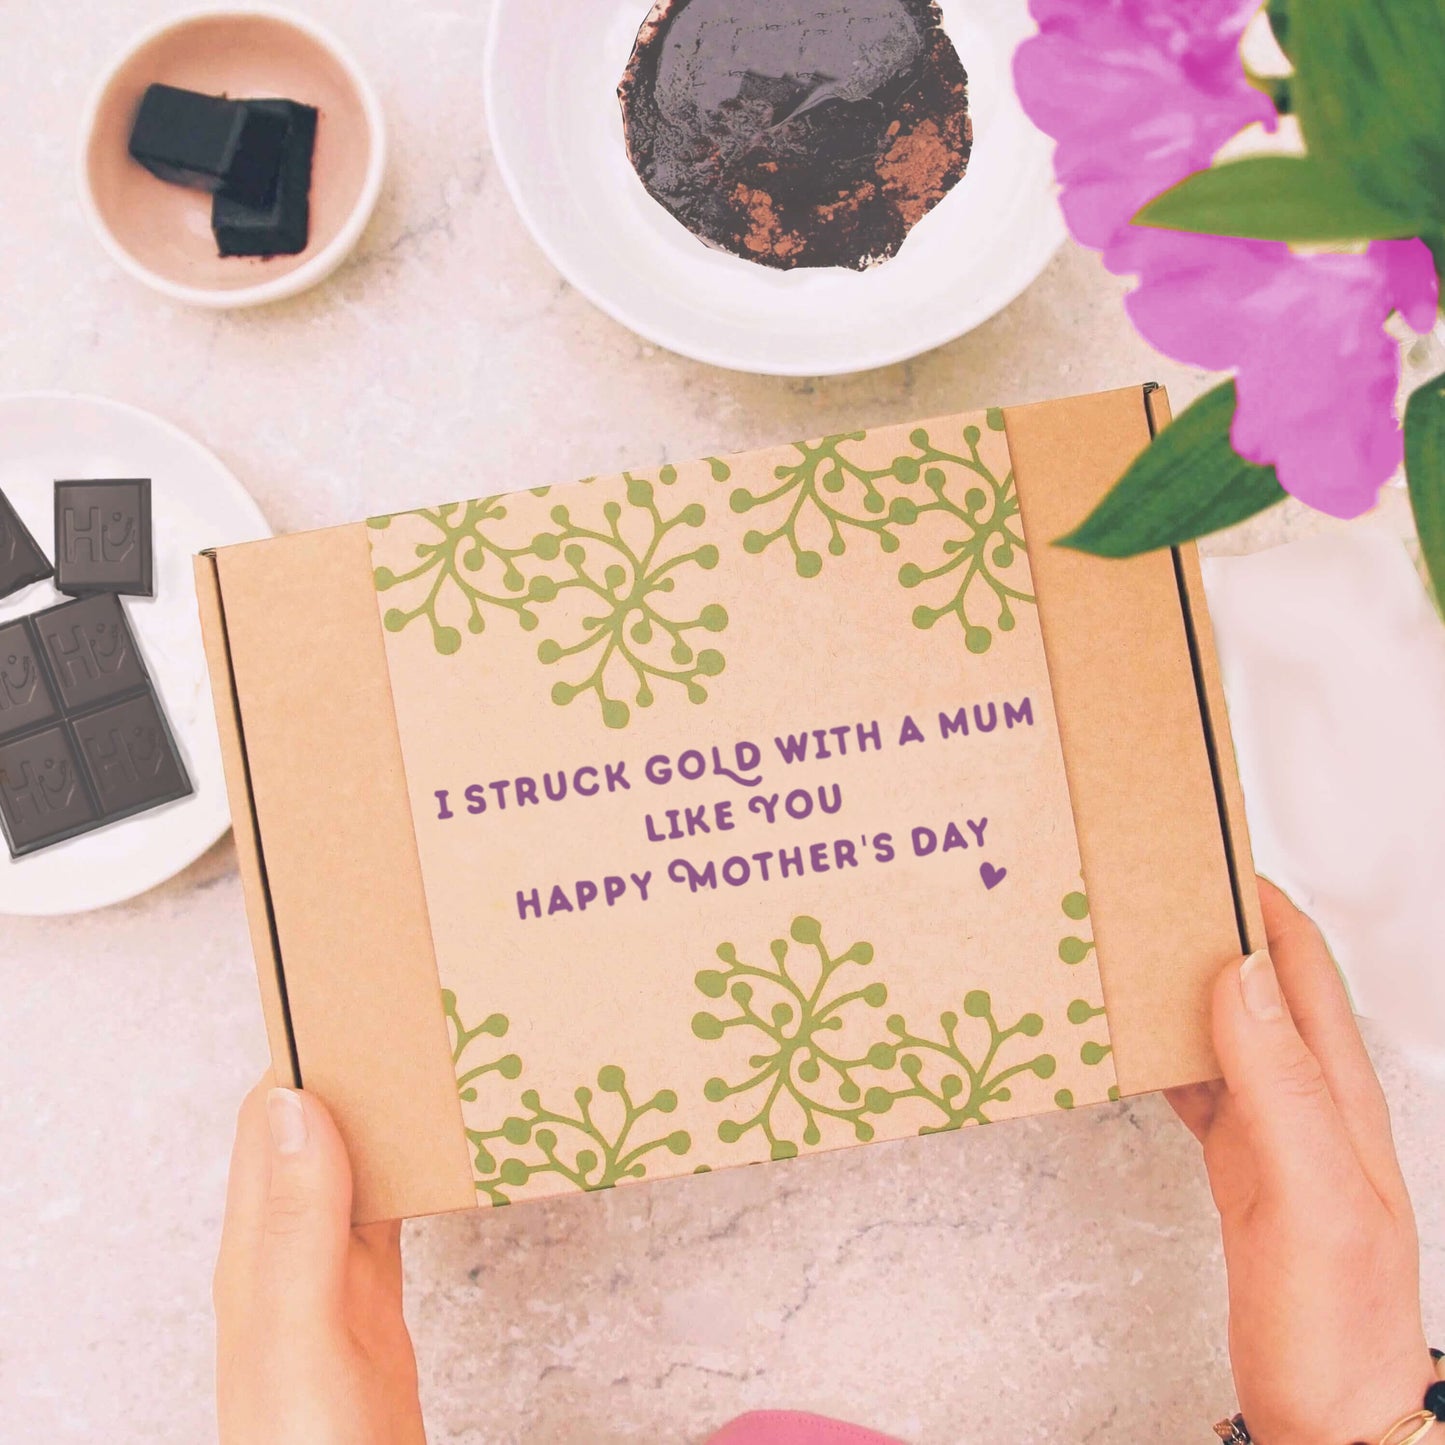 mother's day gift box with gift message 'i struck gold with a mum like you, happy mother's day'